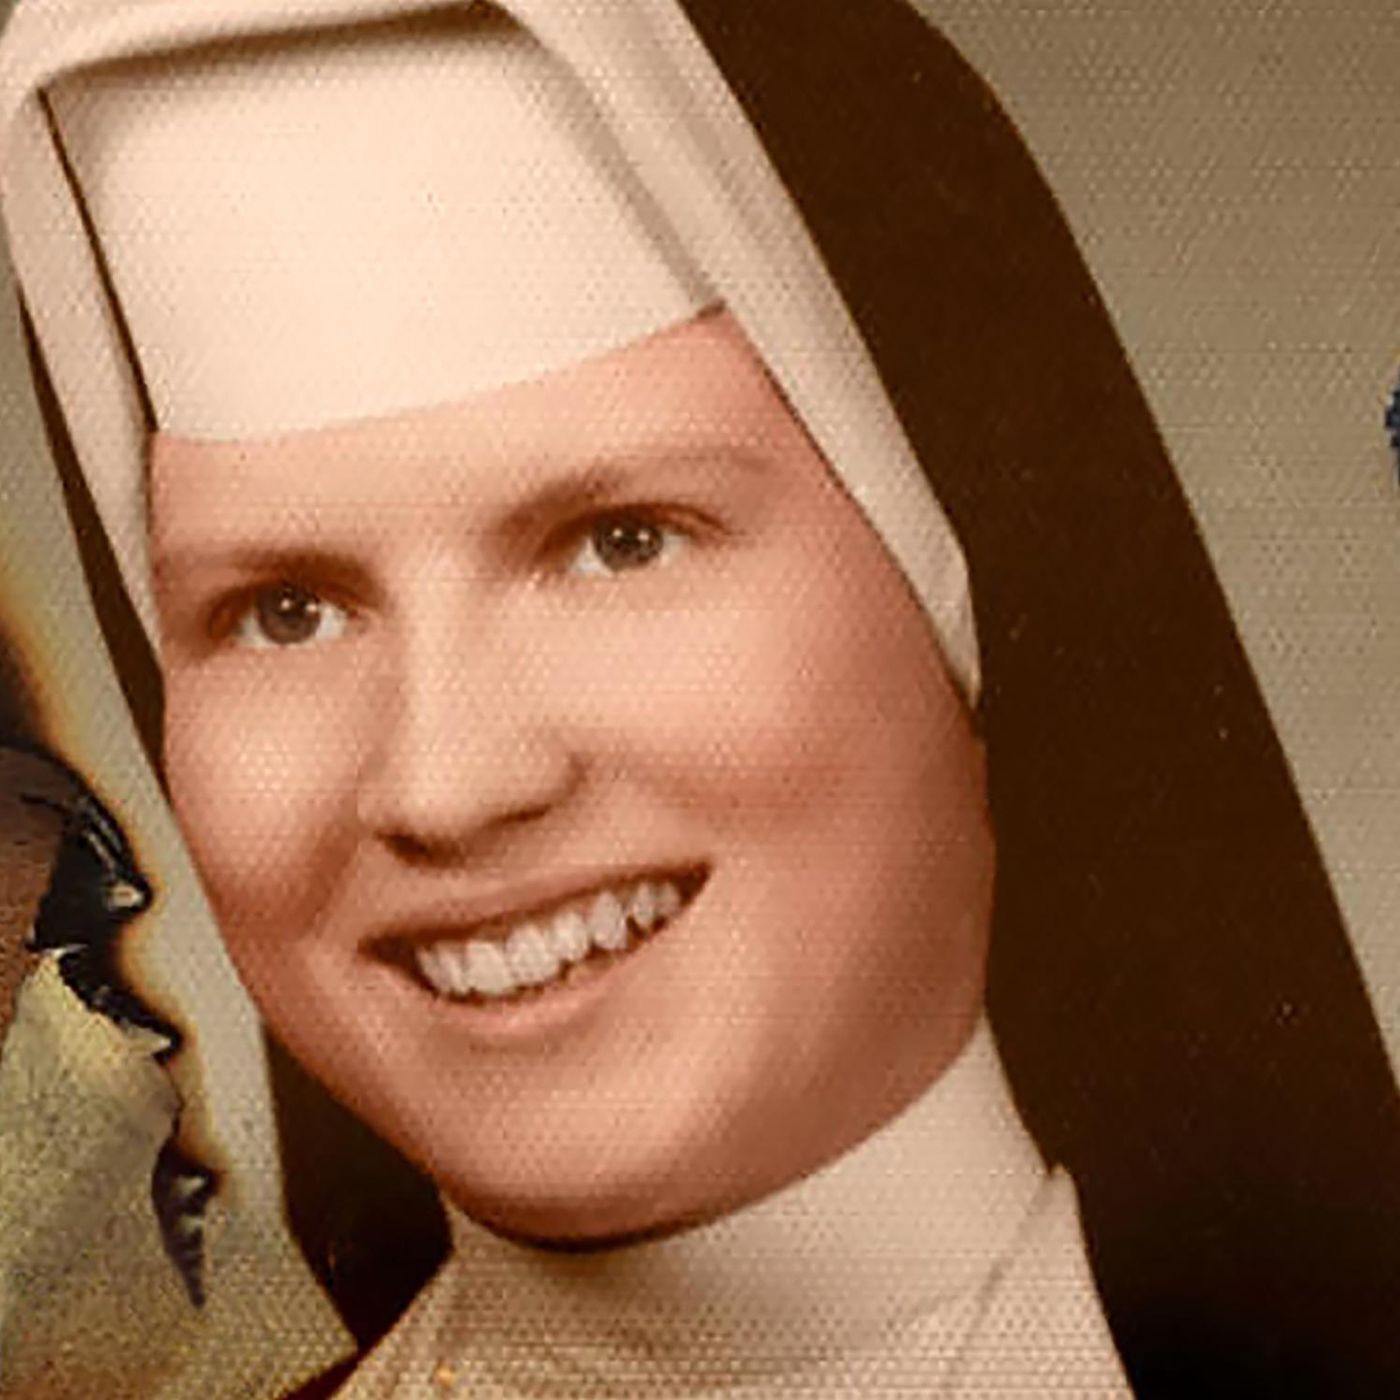 S2 Ep59: Sister Cathy, The Examiner’s Tale – A Forensic Reckoning